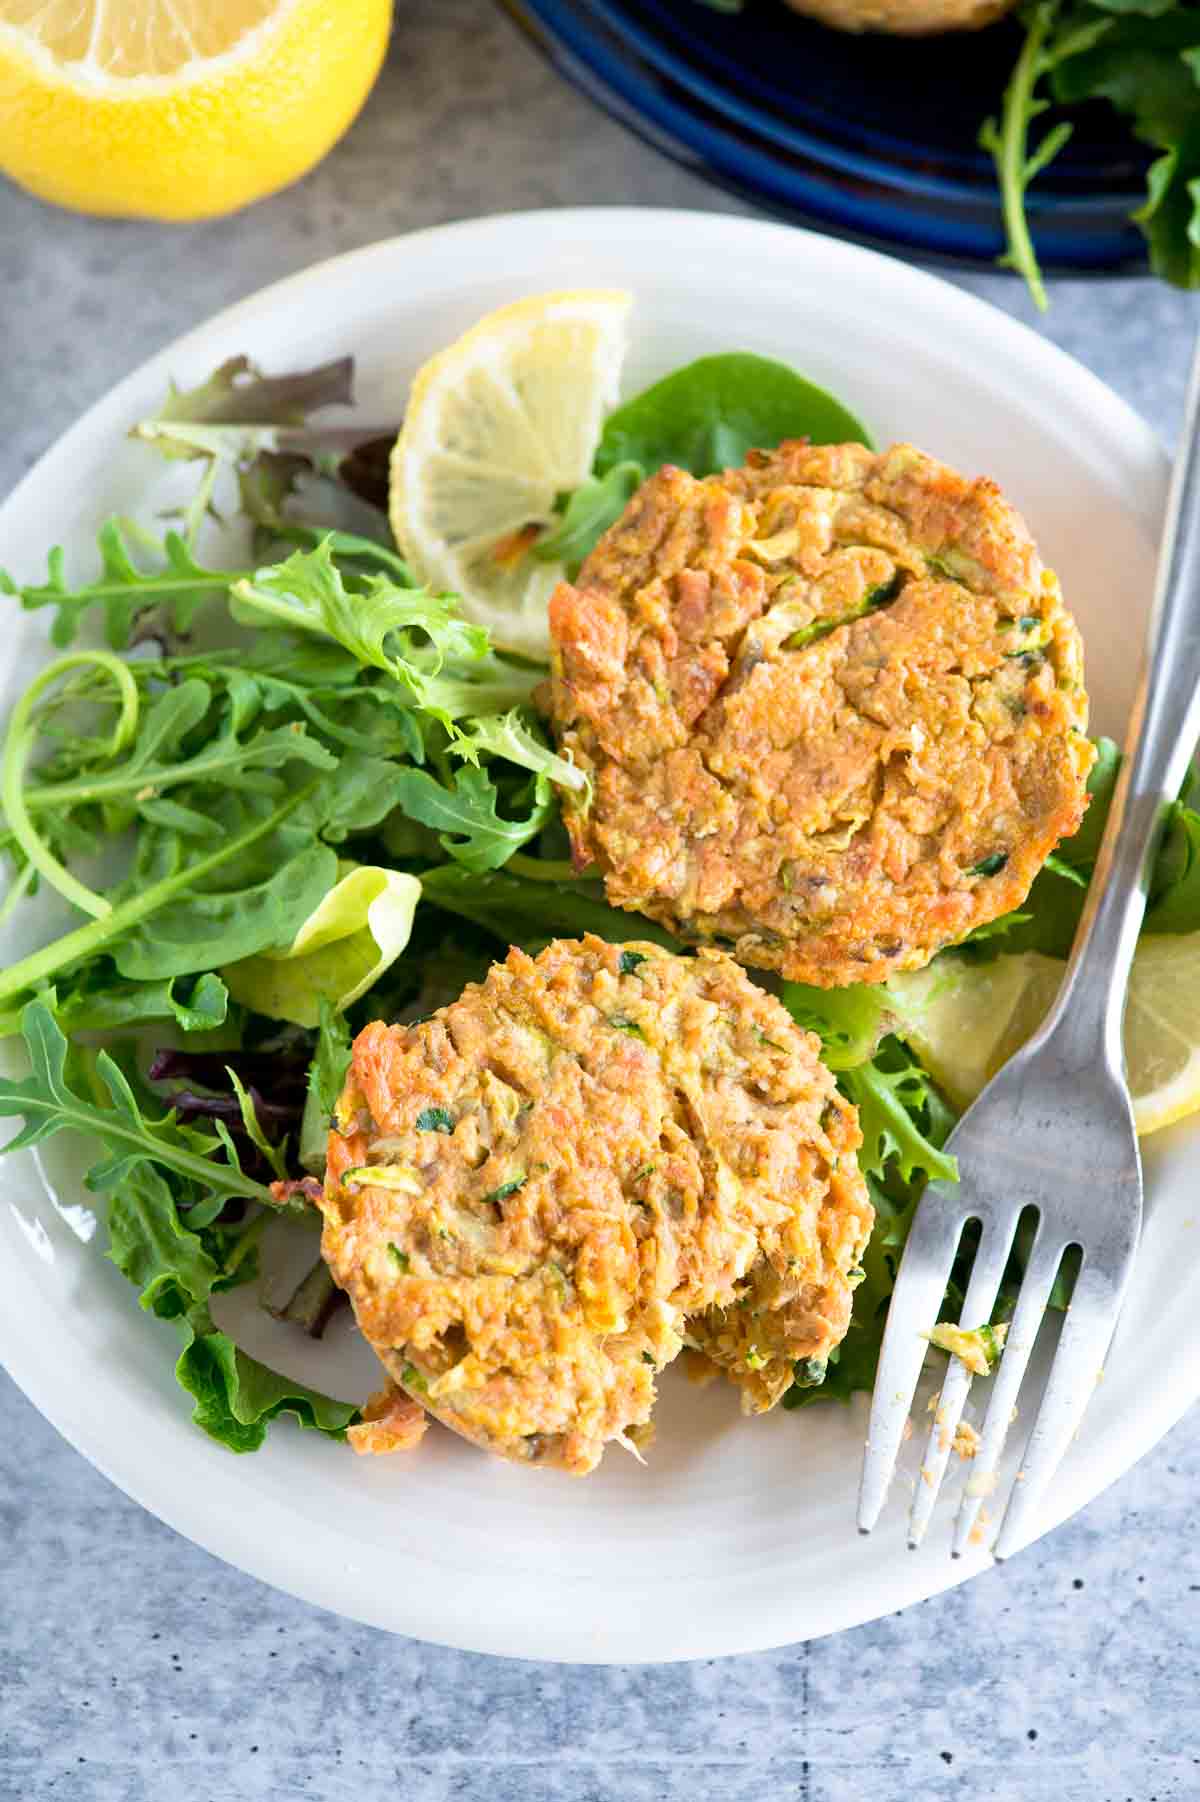 two salmon patties on a plate with salad greens and a fork